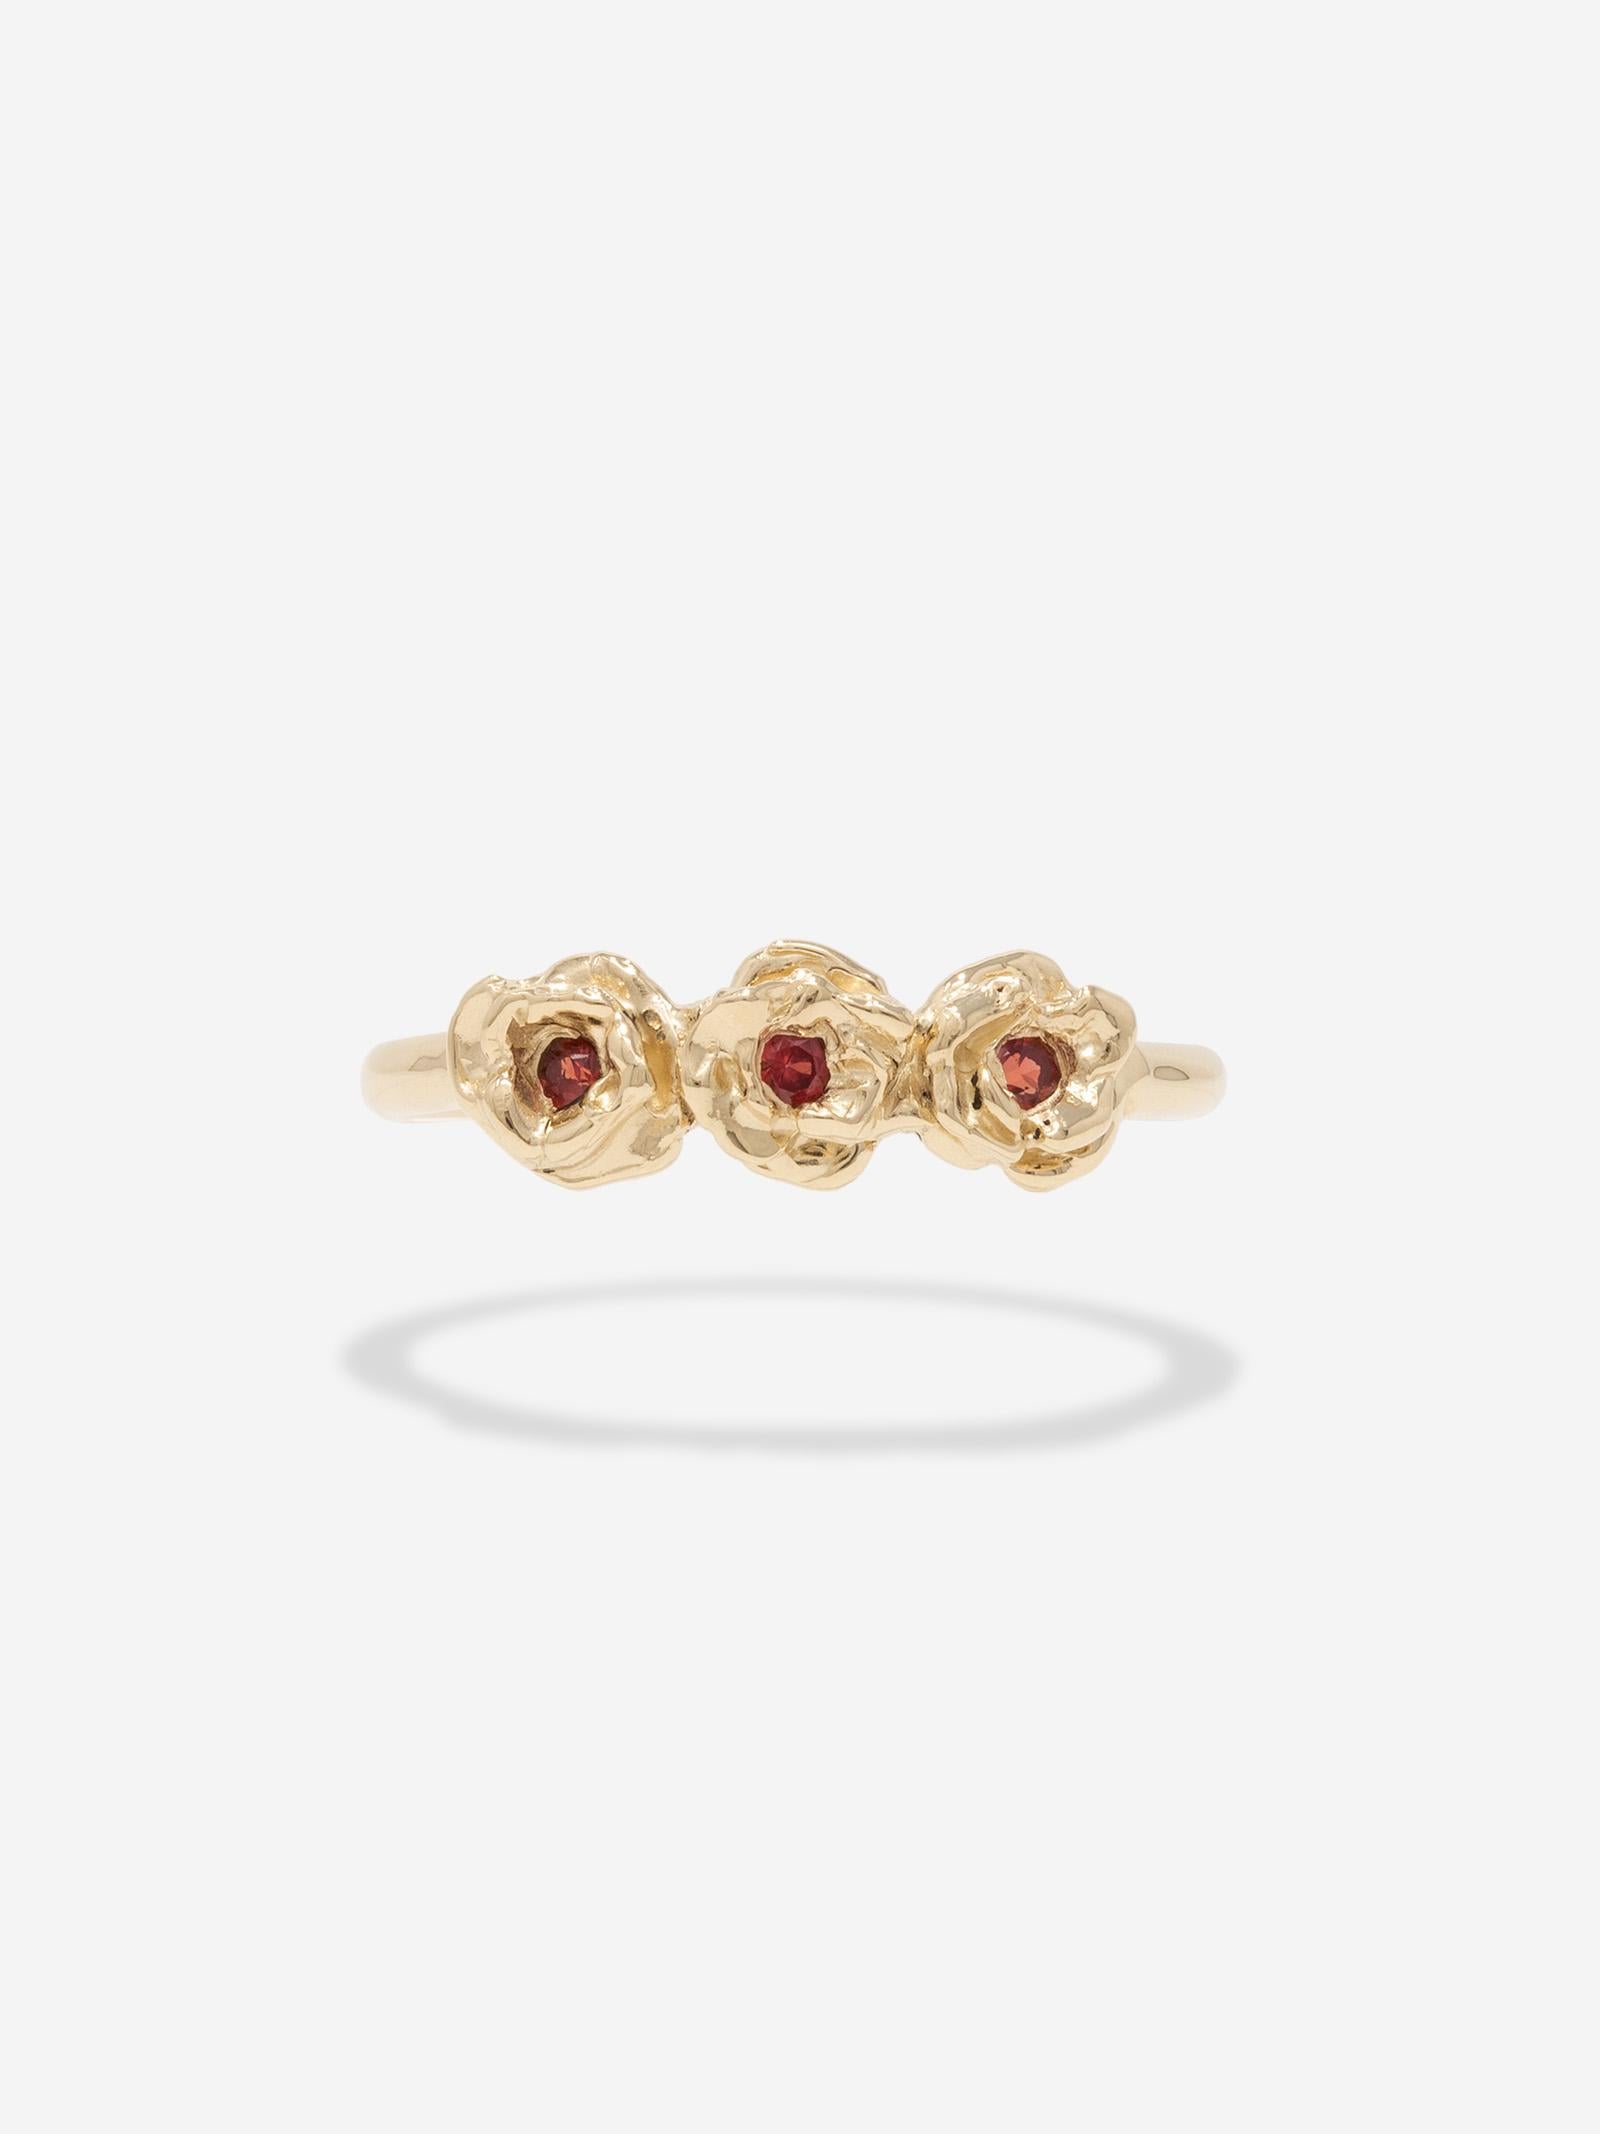 CAPTIVE - A one-of-a-kind hand carved rose ring cast in solid 10k gold and set with three 2mm red sapphires.